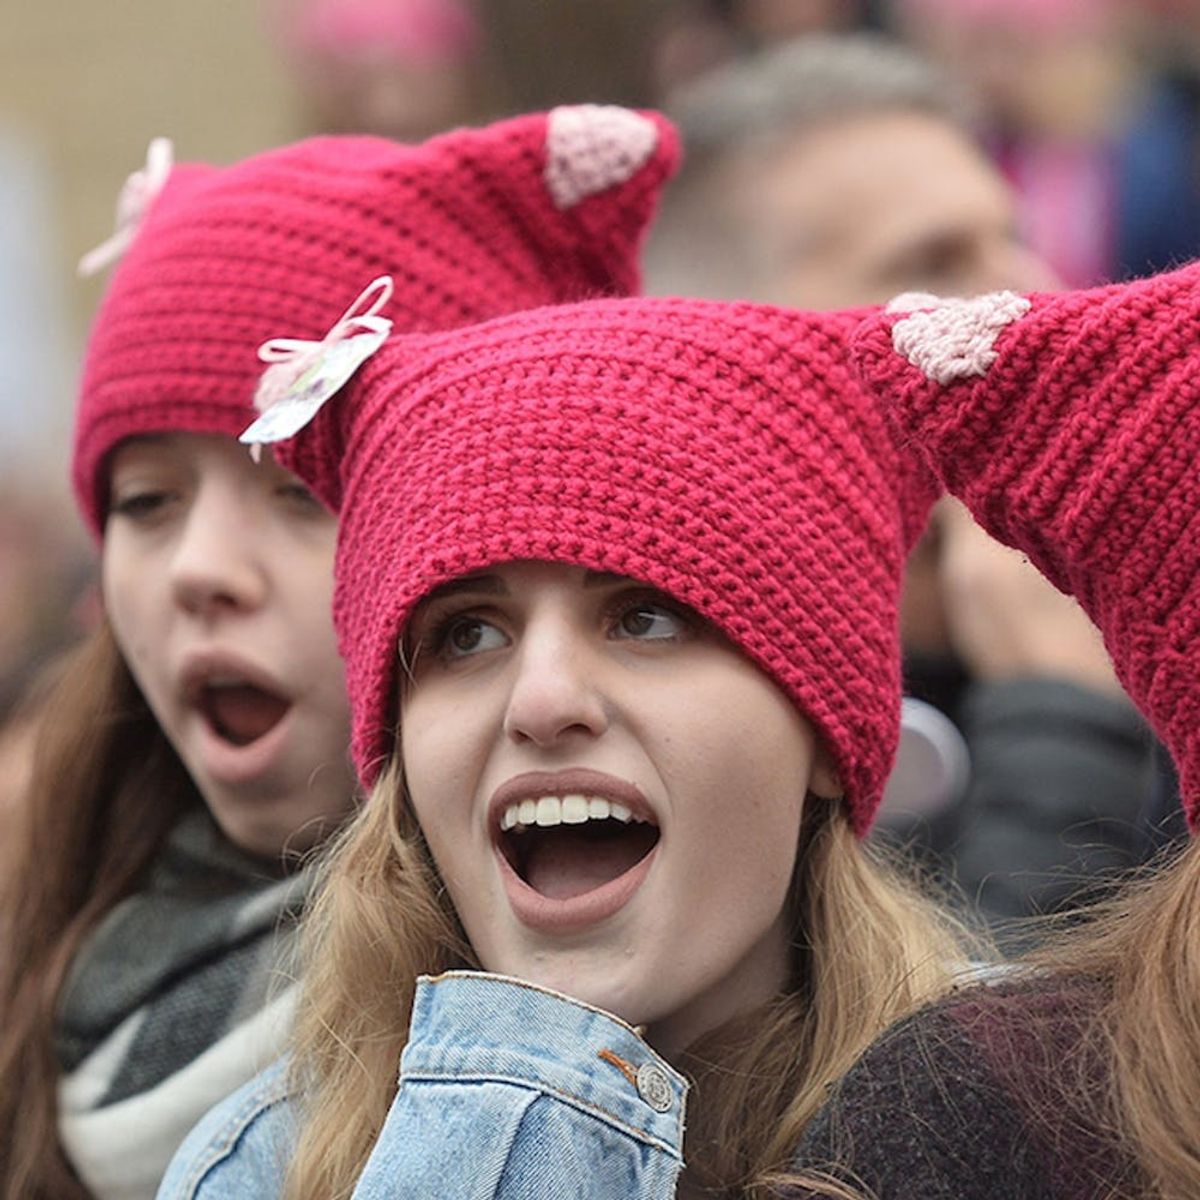 Why the 2018 Women’s March Will Likely See Fewer Pussyhats